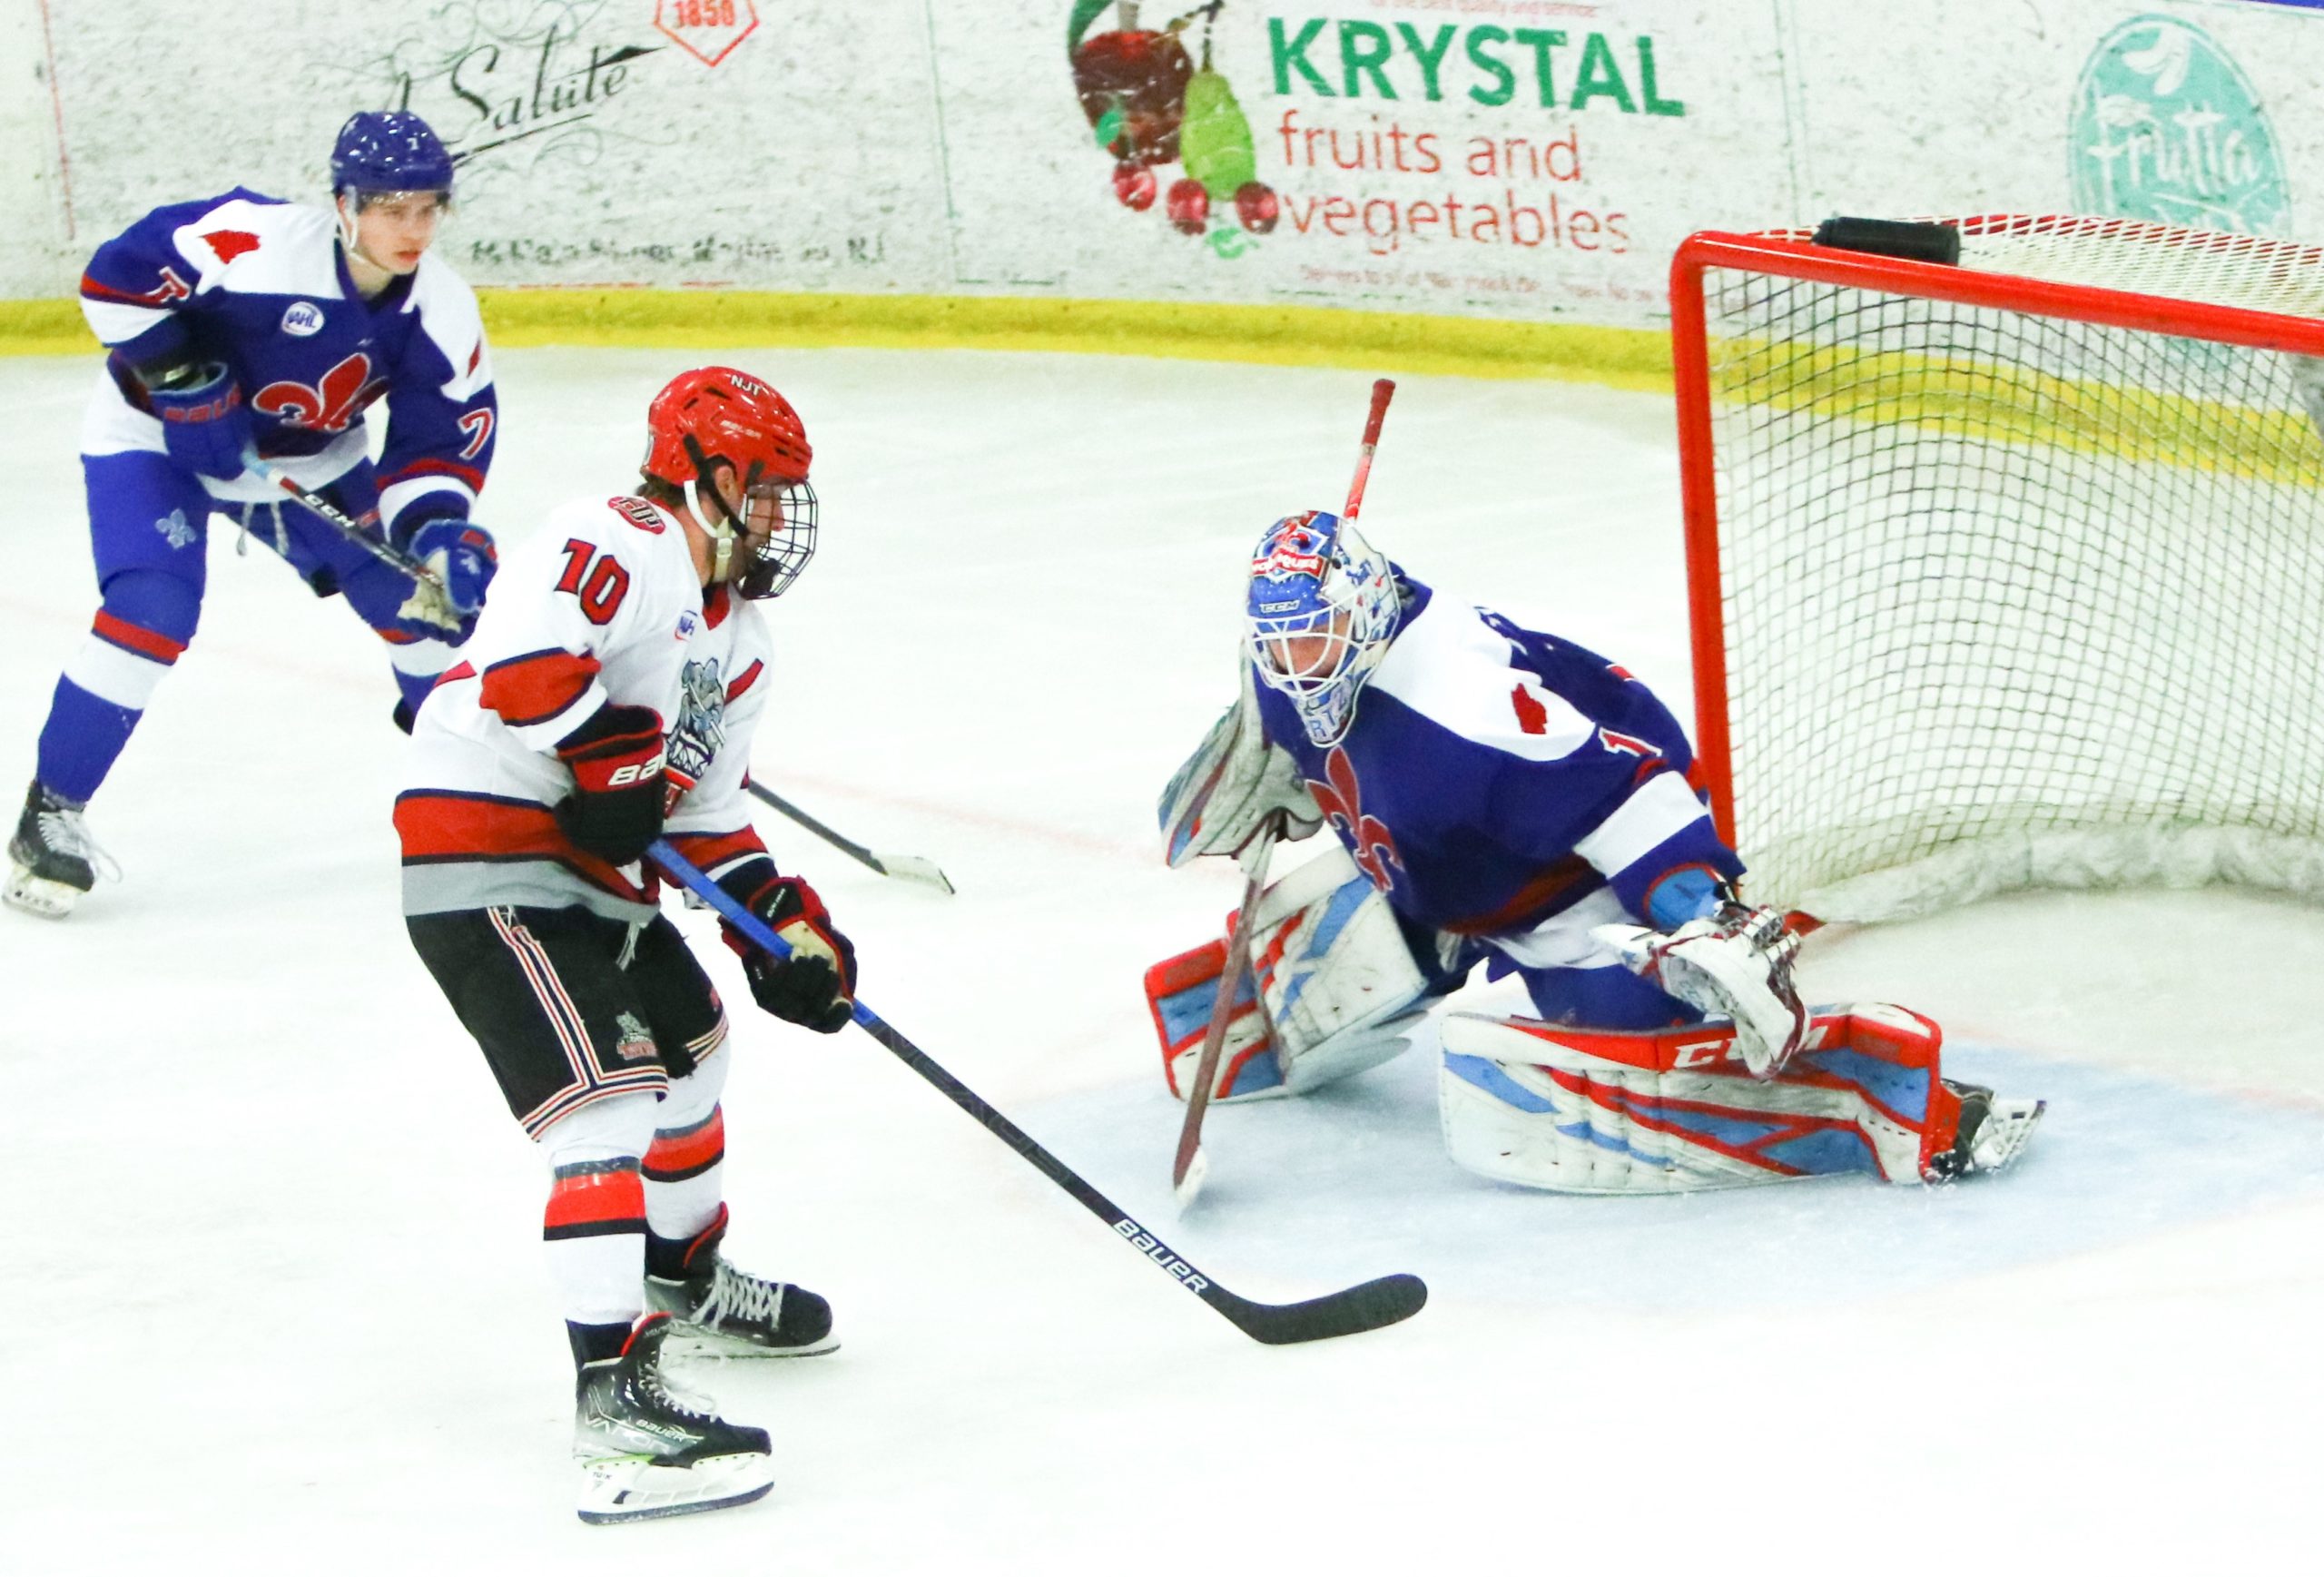 Balanced attack leads Titans to 3 – 1 win over Nordiques